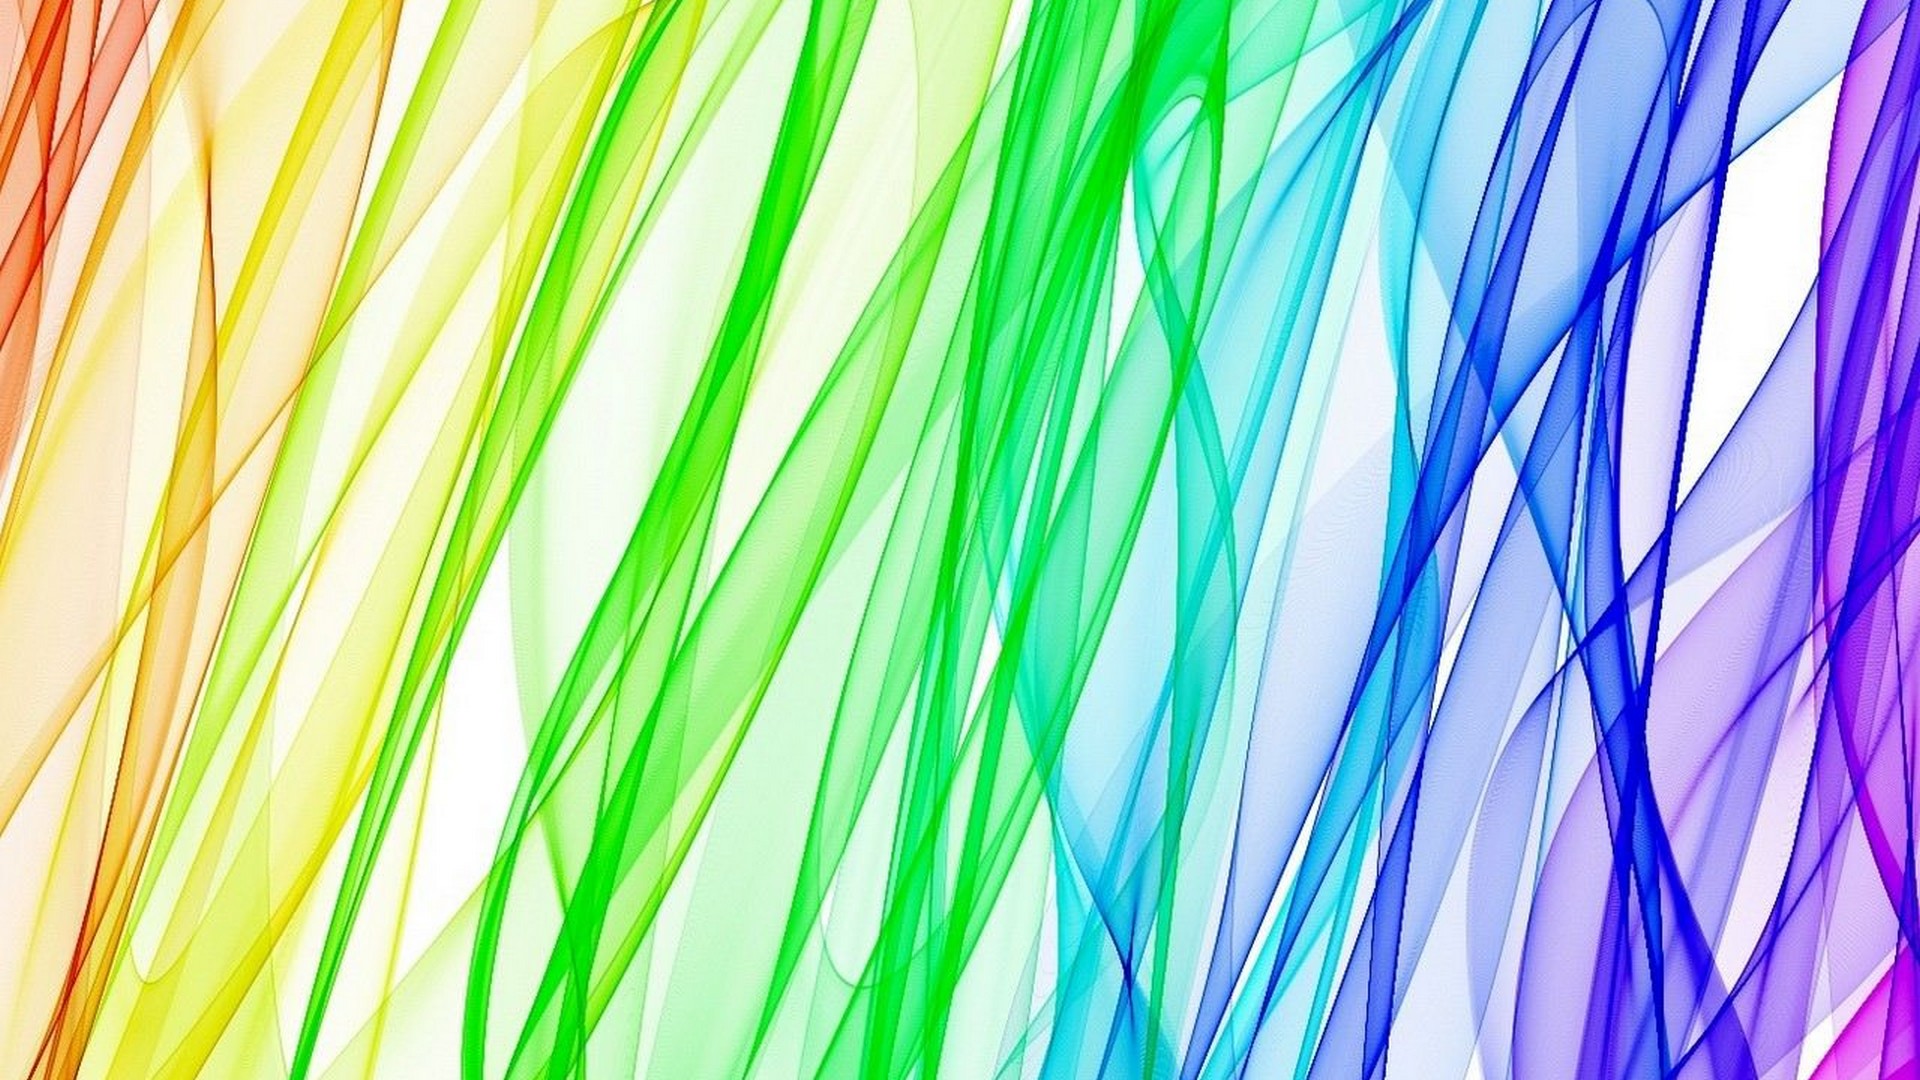 Rainbow Colors HD Wallpaper With Resolution 1920X1080 pixel. You can make this wallpaper for your Desktop Computer Backgrounds, Mac Wallpapers, Android Lock screen or iPhone Screensavers